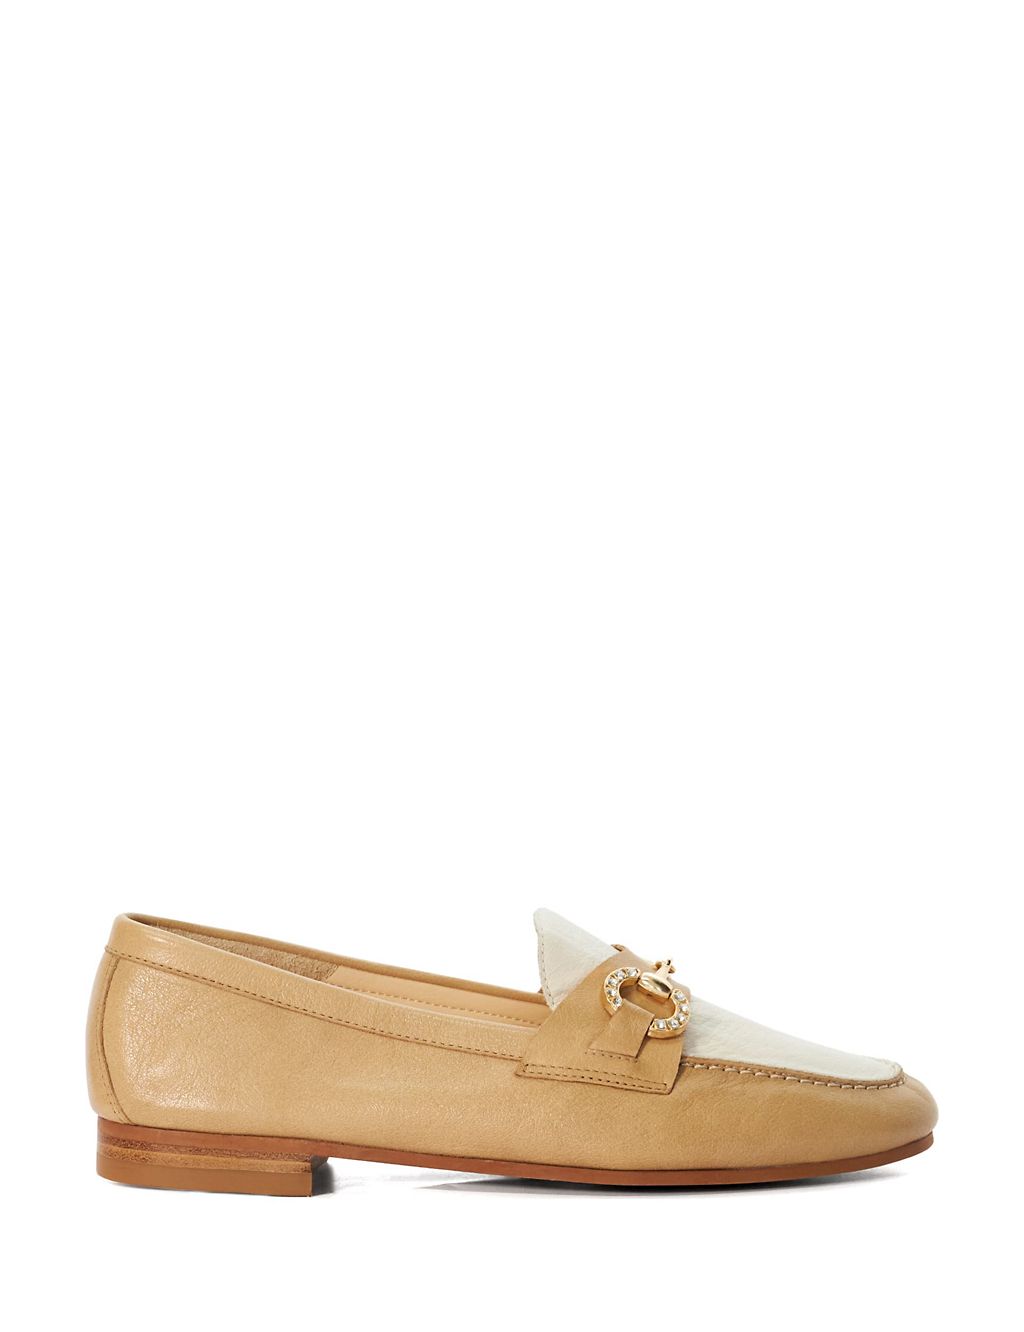 Leather Bar Slip On Flat Loafers 3 of 5